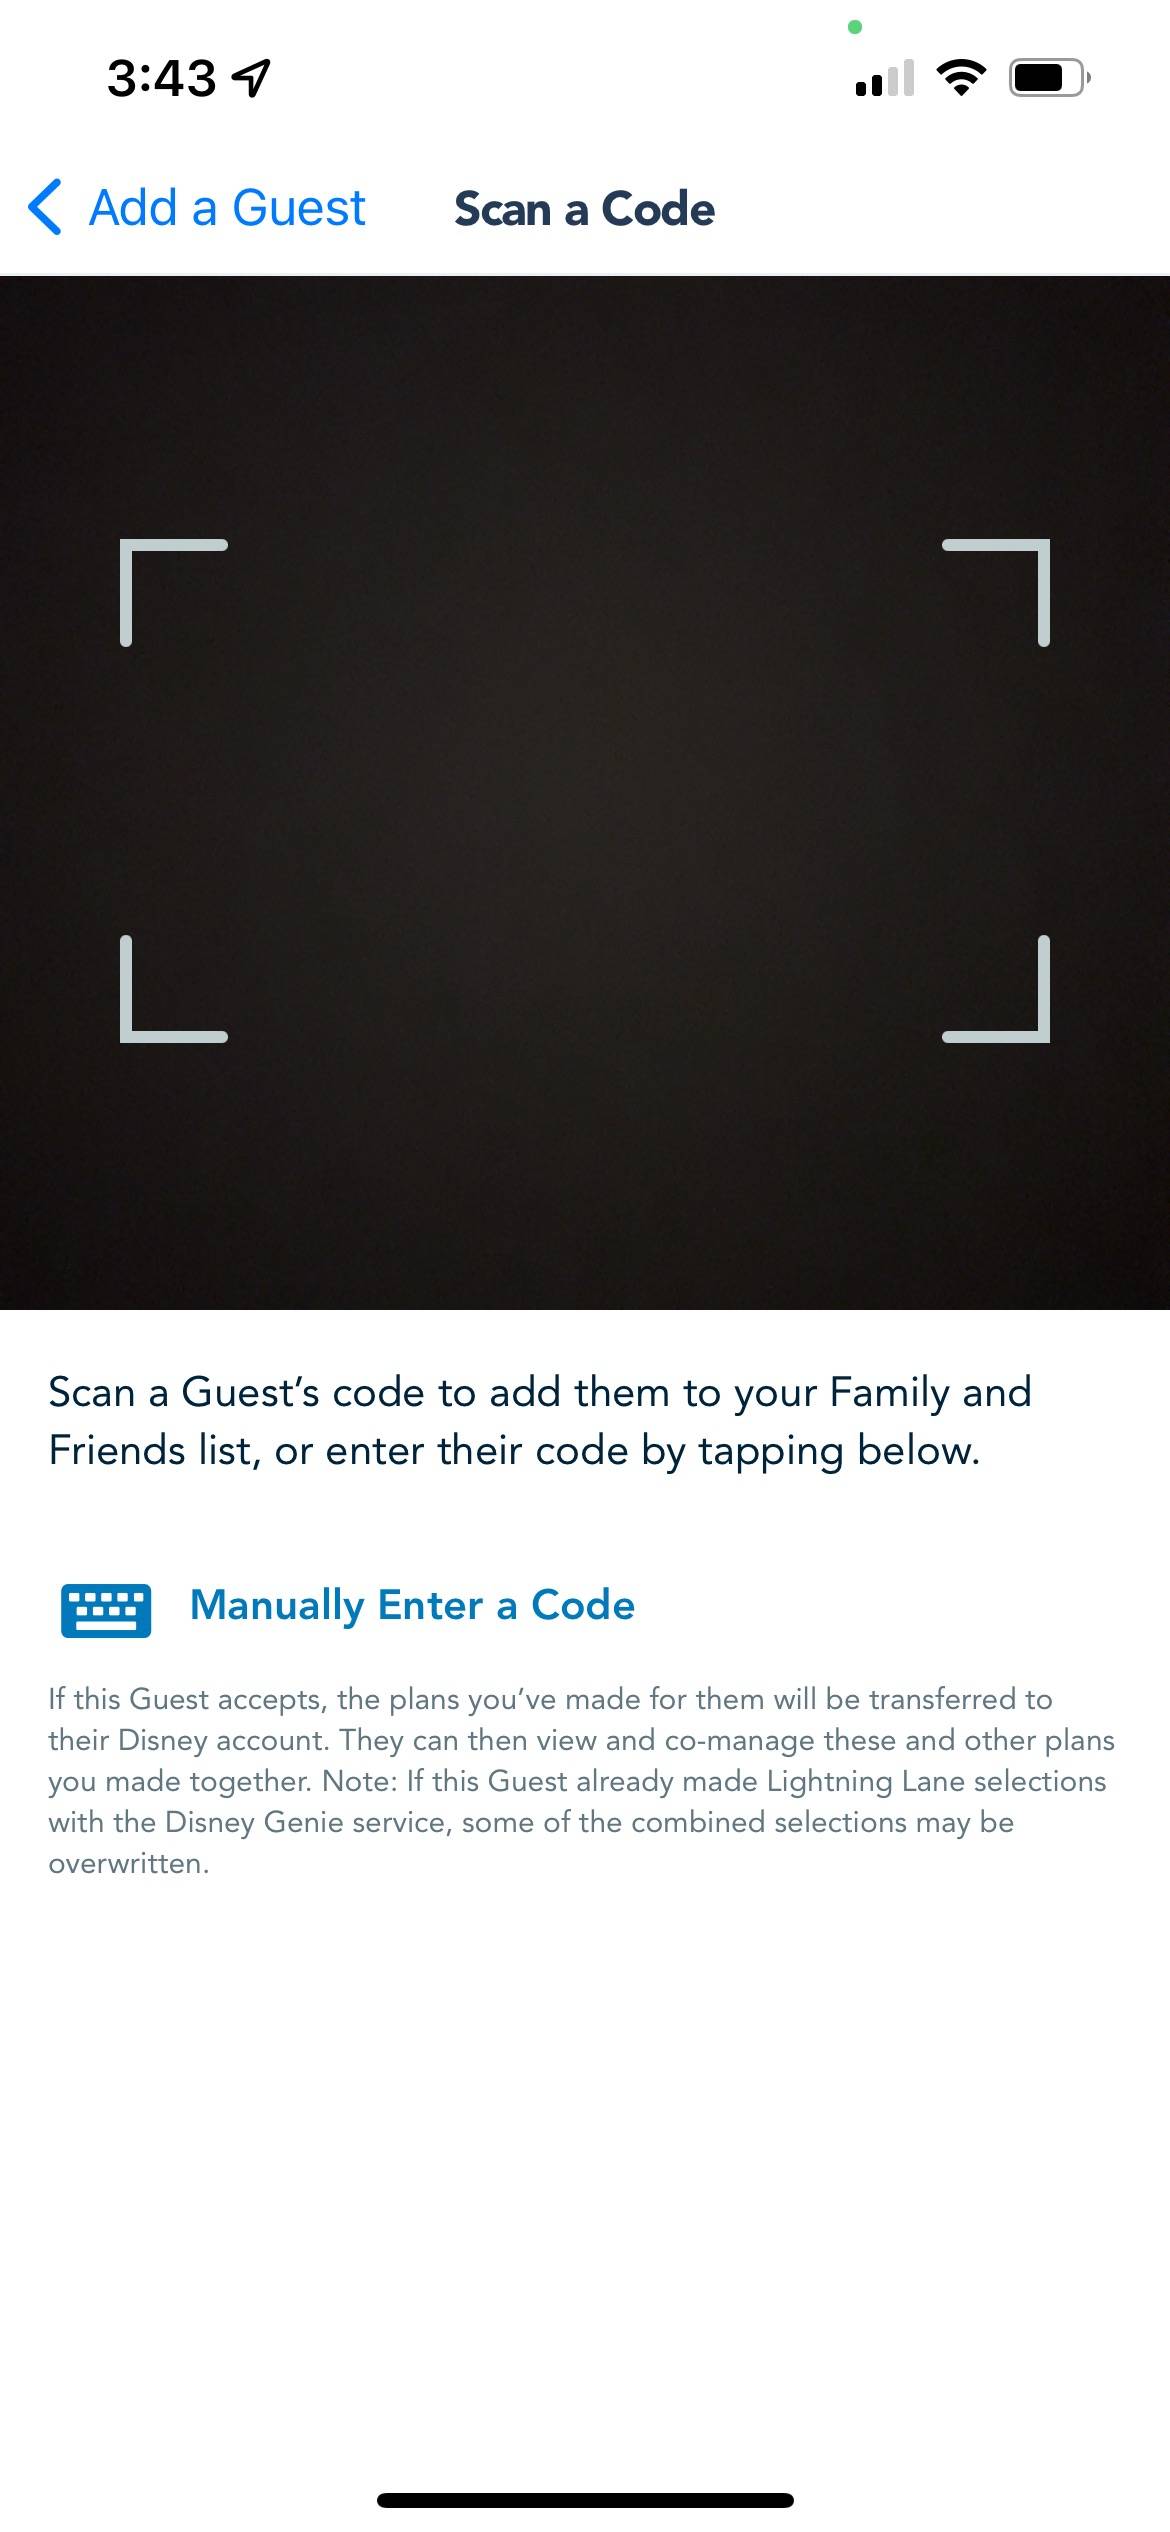 'My Disney Experience' now offers easy Friends and family linking with QR code